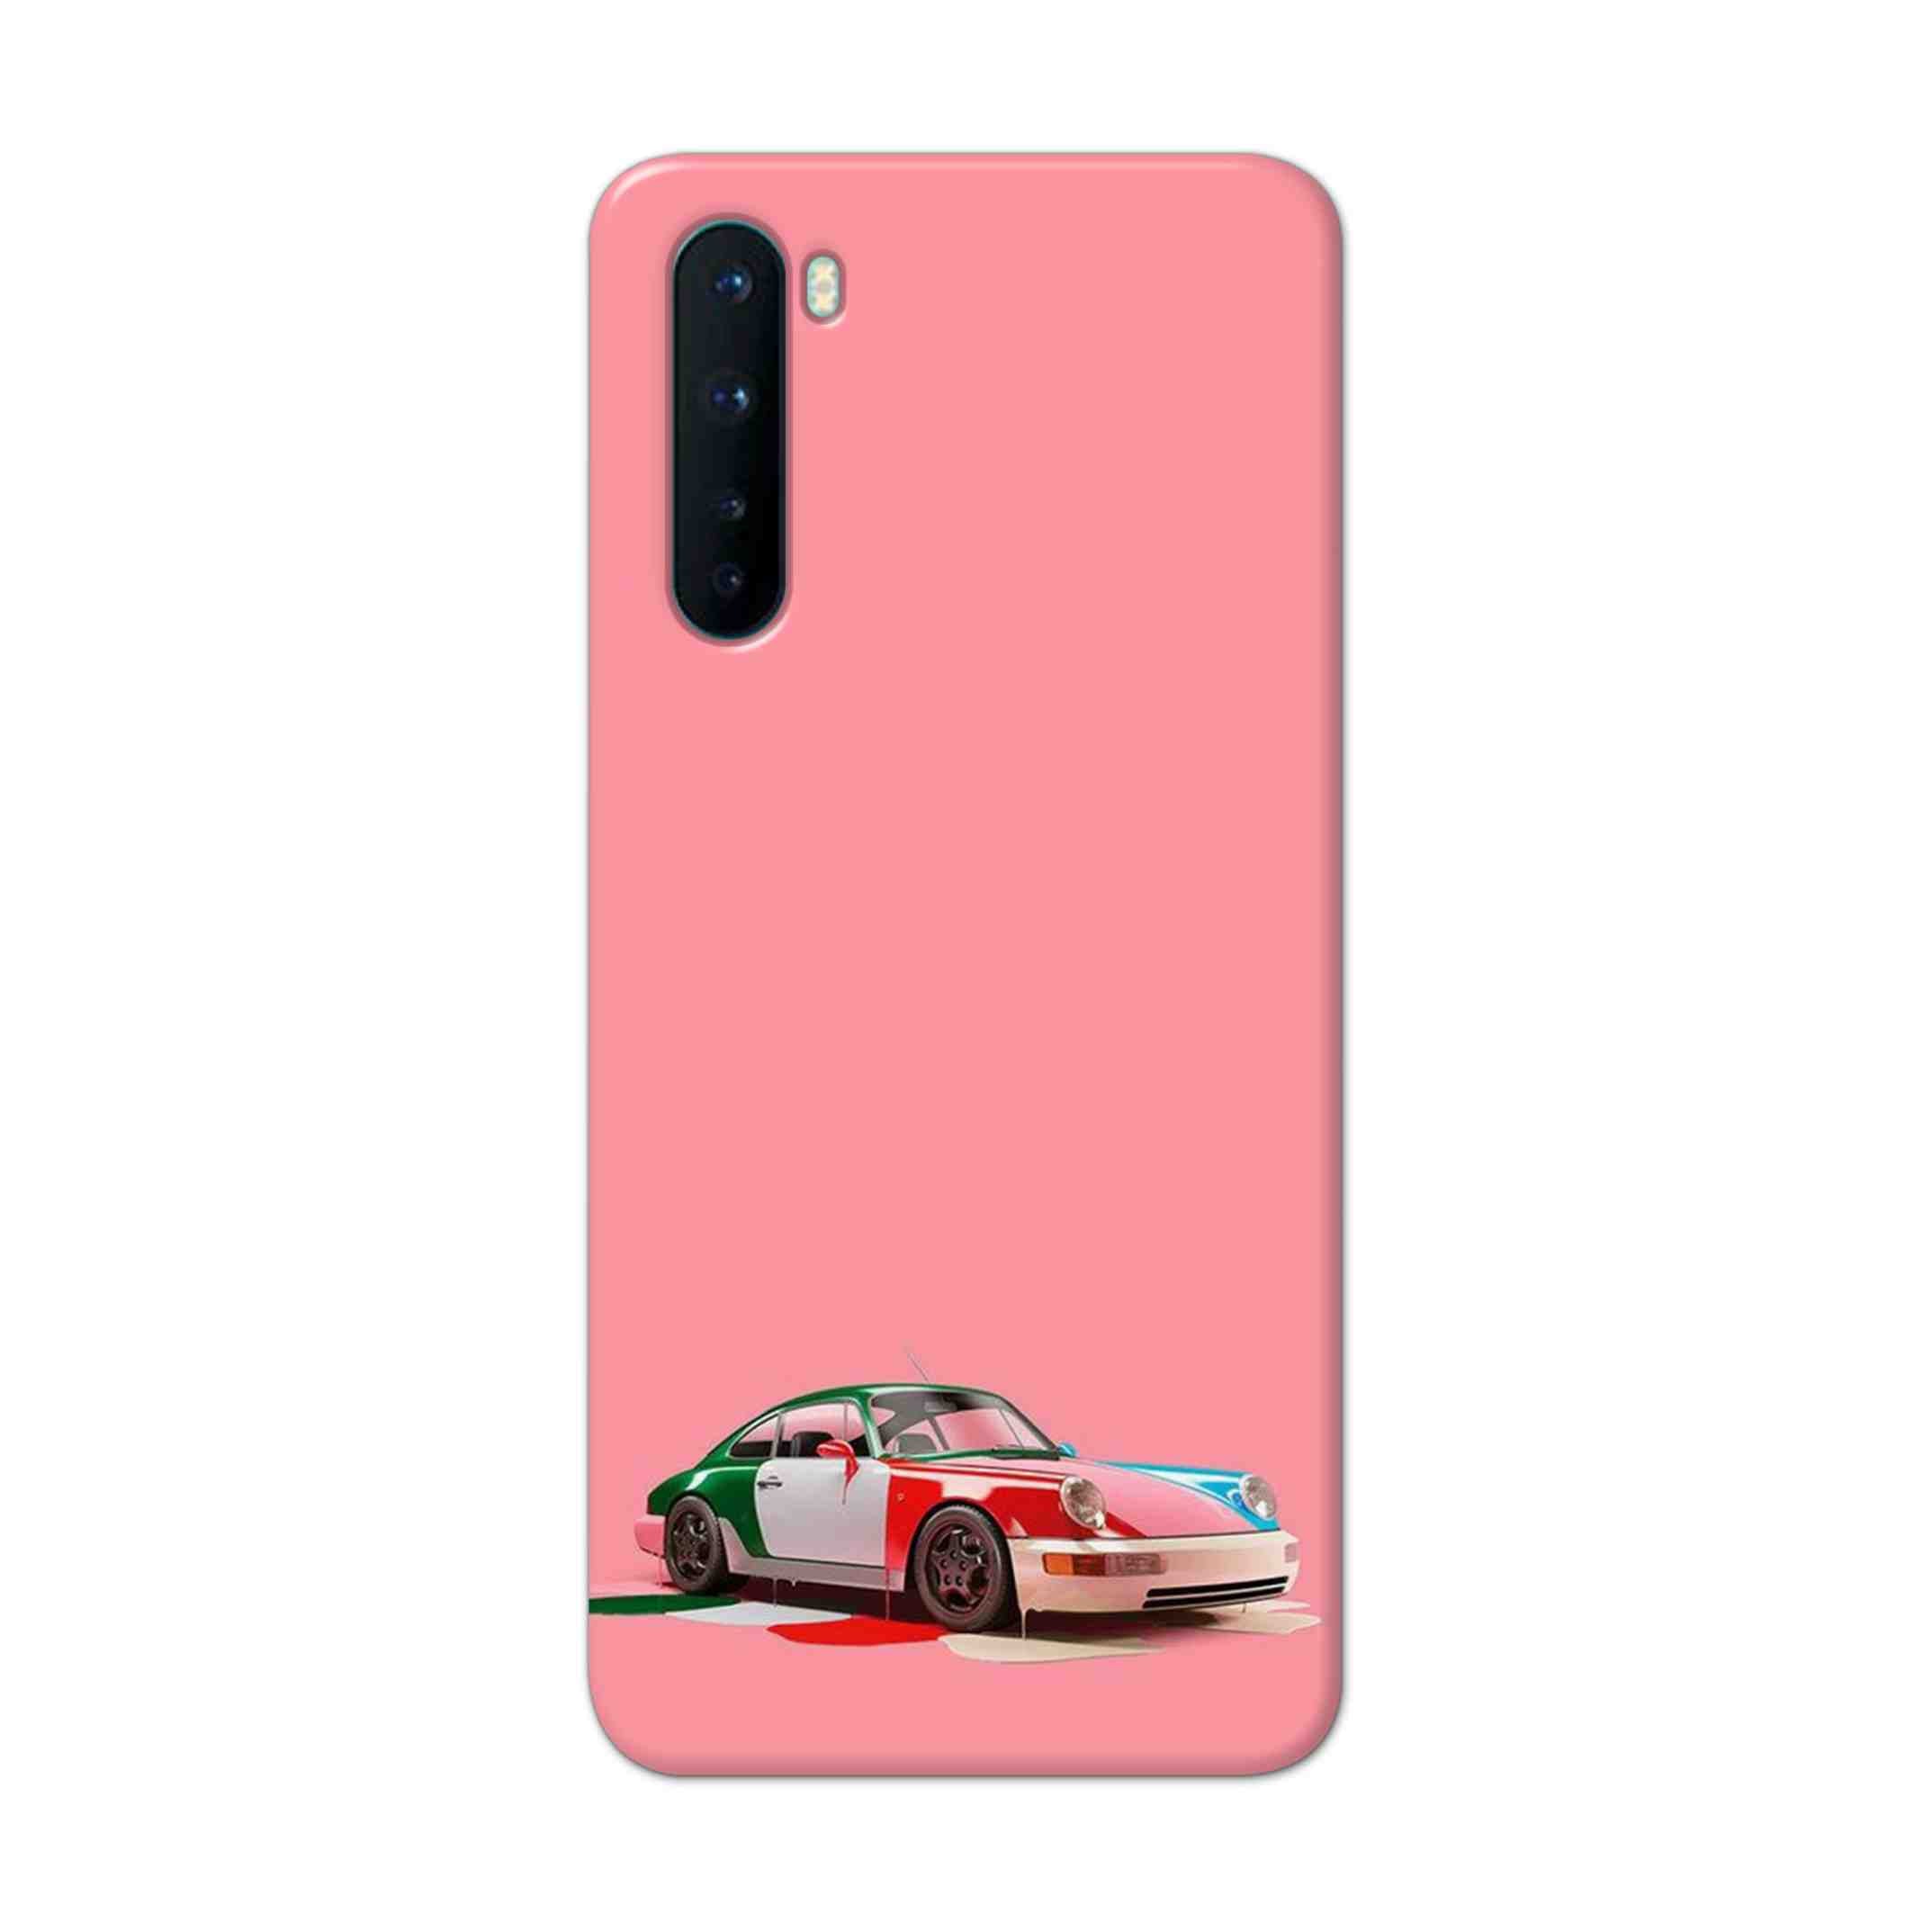 Buy Pink Porche Hard Back Mobile Phone Case Cover For OnePlus Nord Online